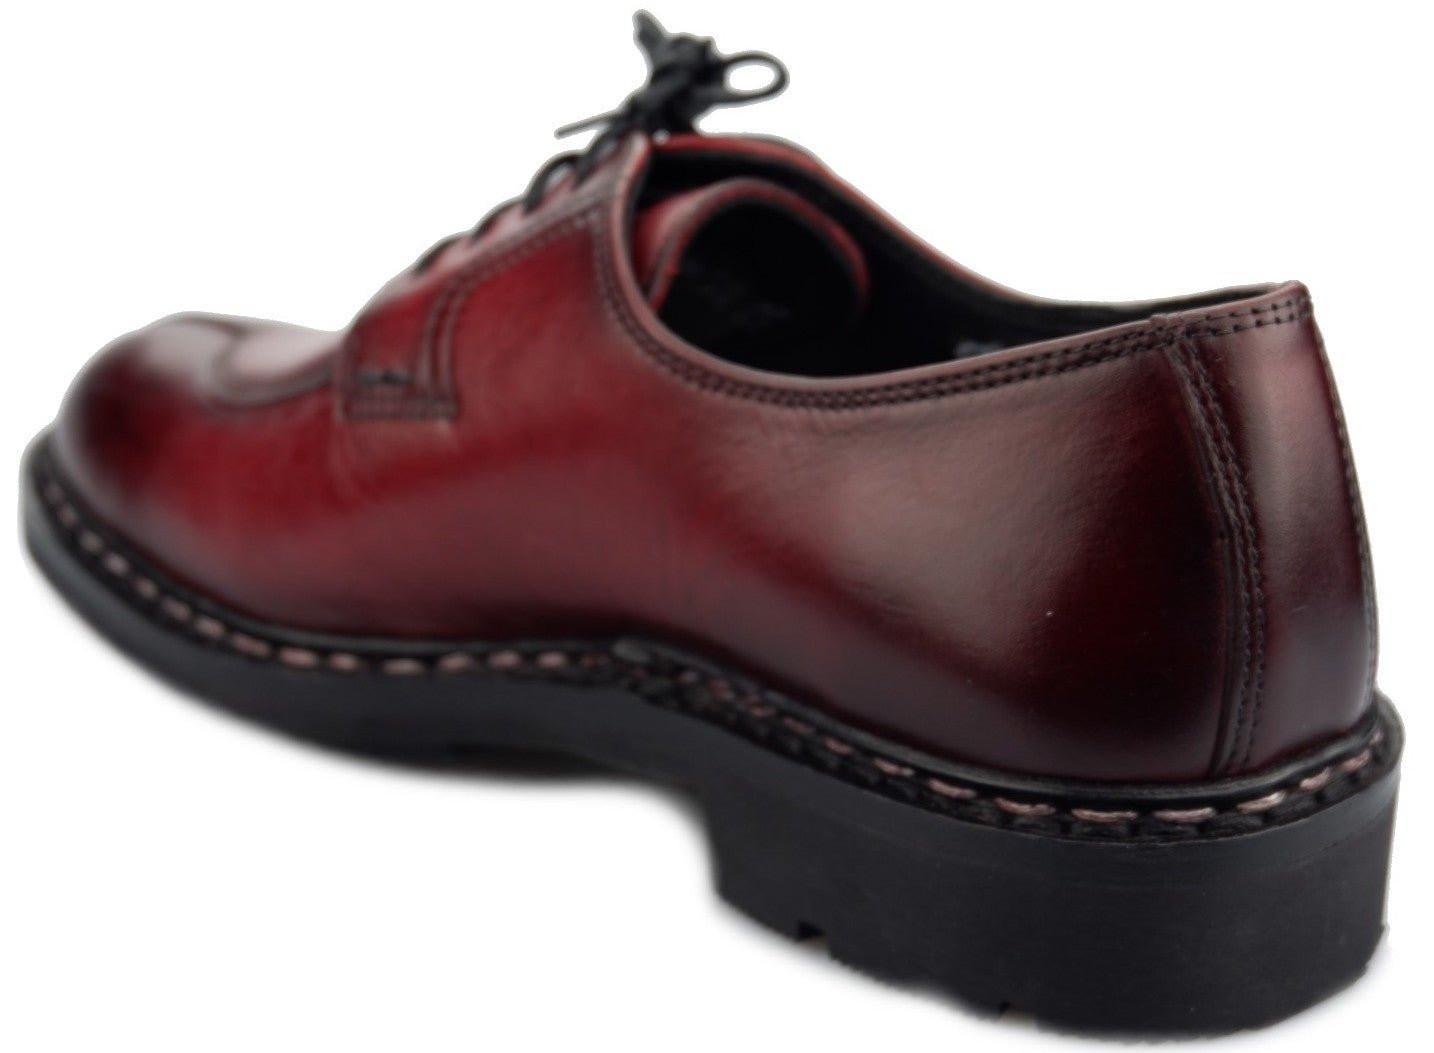 Mephisto  Sandro - Chaussure à lacets cuir 